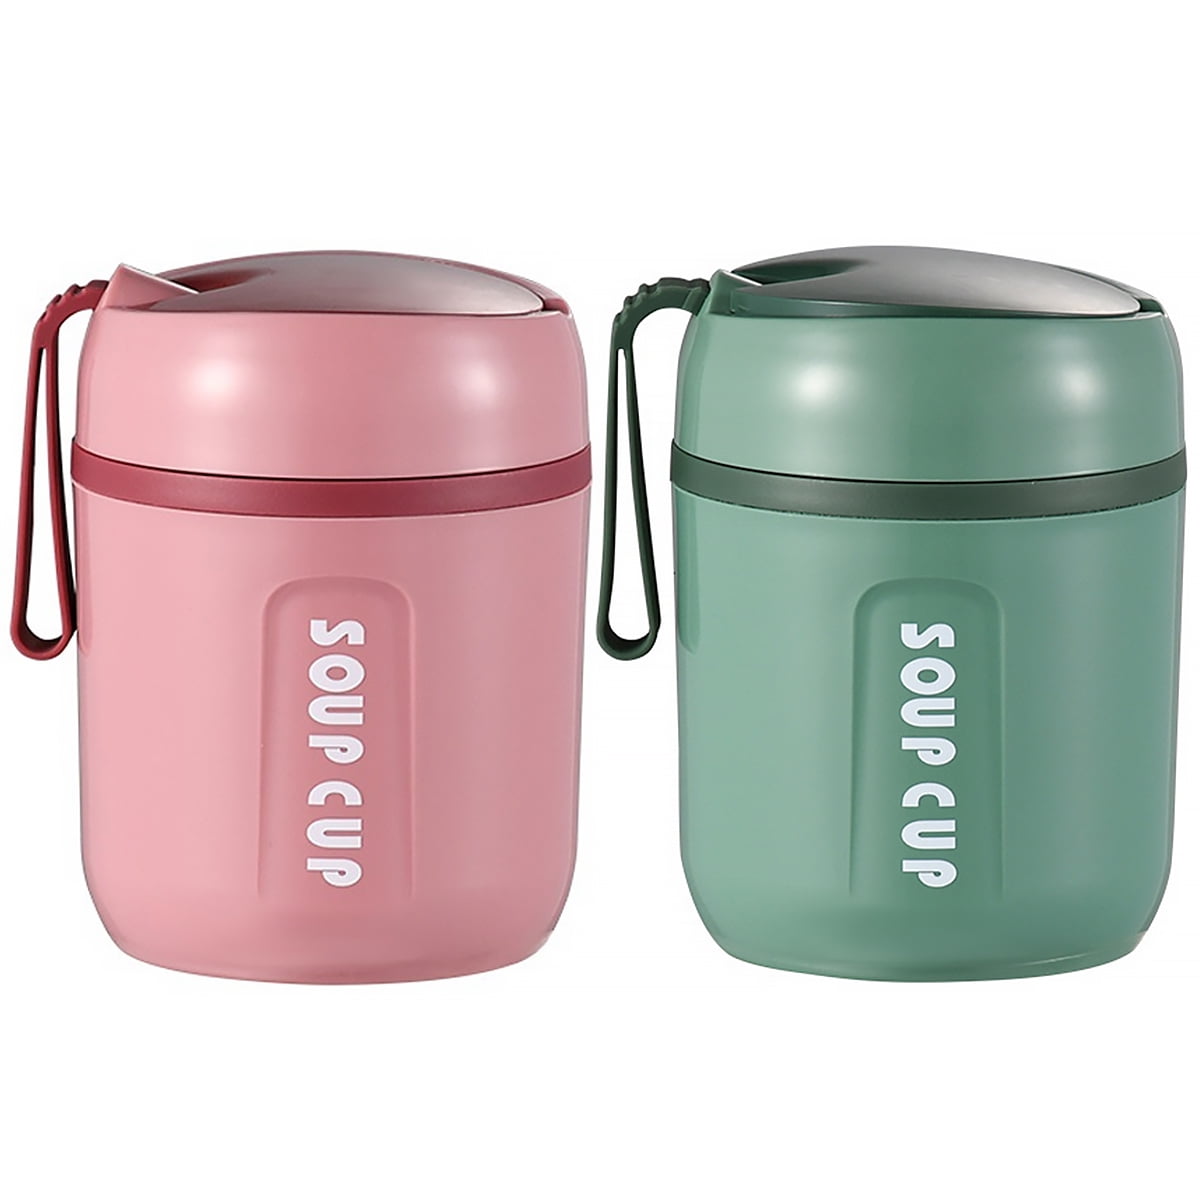 Oavqhlg3b Plastic Insulated Soup Cup,Thermal Insulated Food Jar with Handle, Leak Proof Soup Cup for Kids and Adult Suited for School Office Picnic